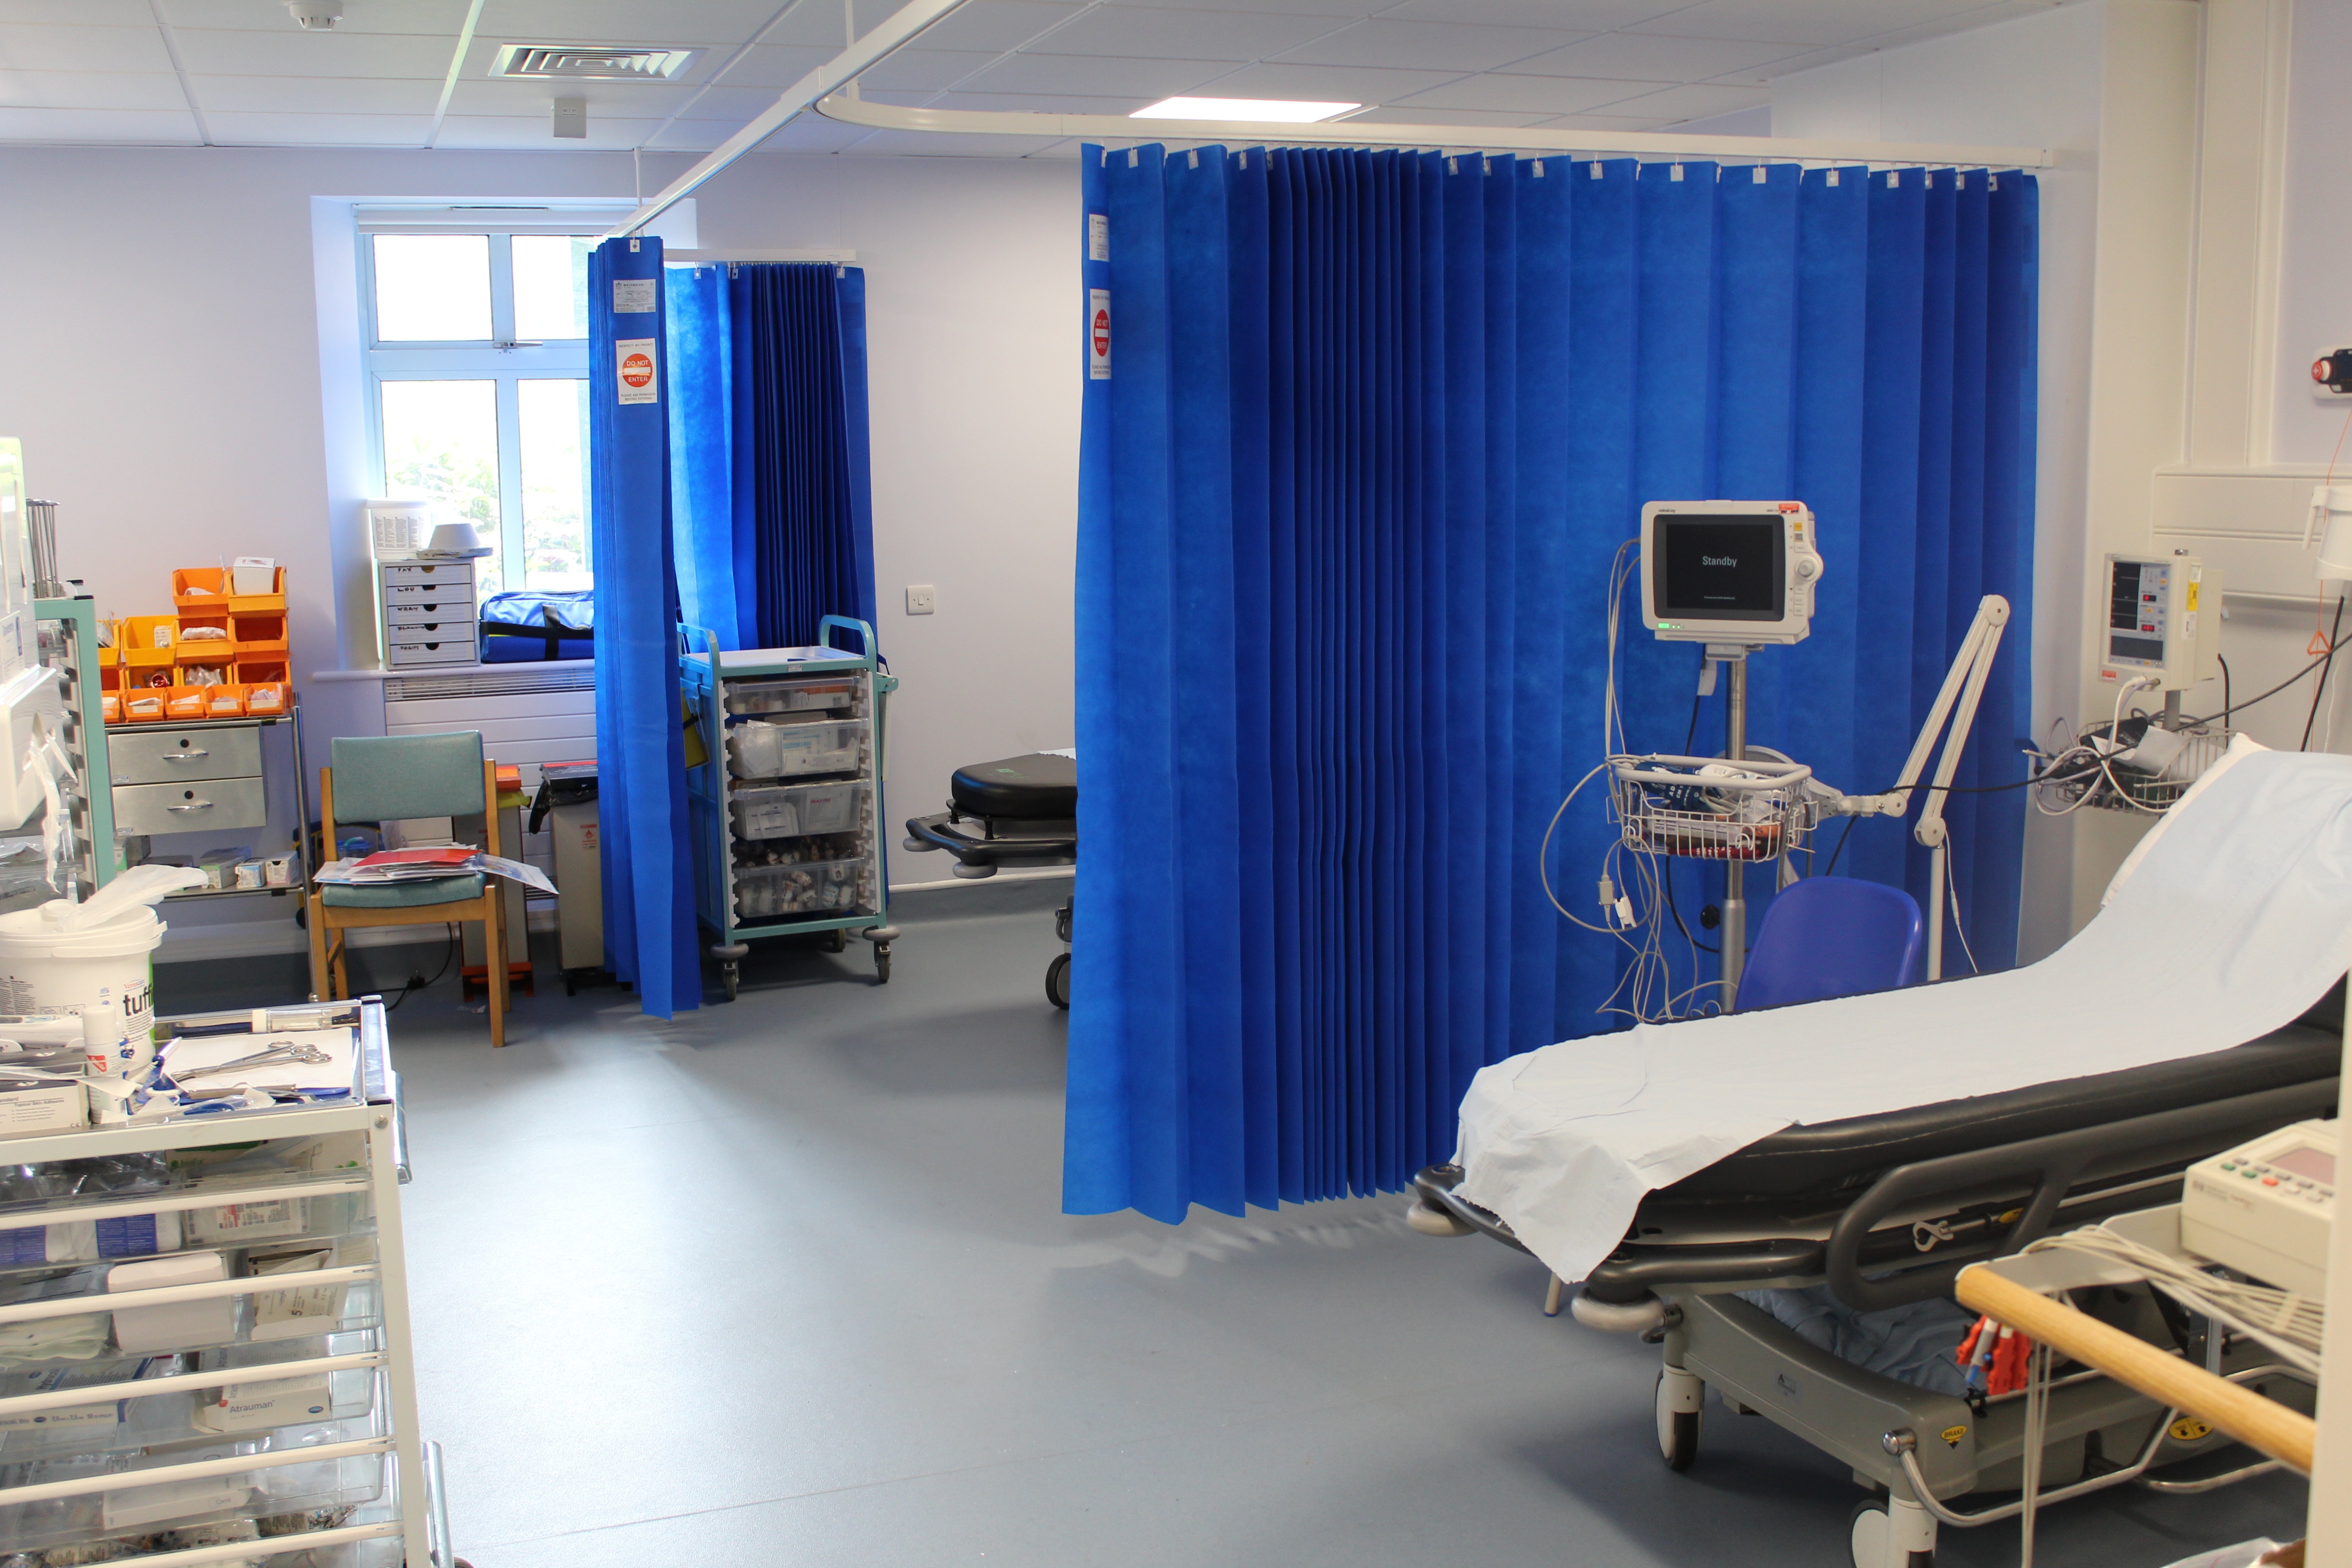 Patients reaping the benefit of new minor injuries unit at Bridport